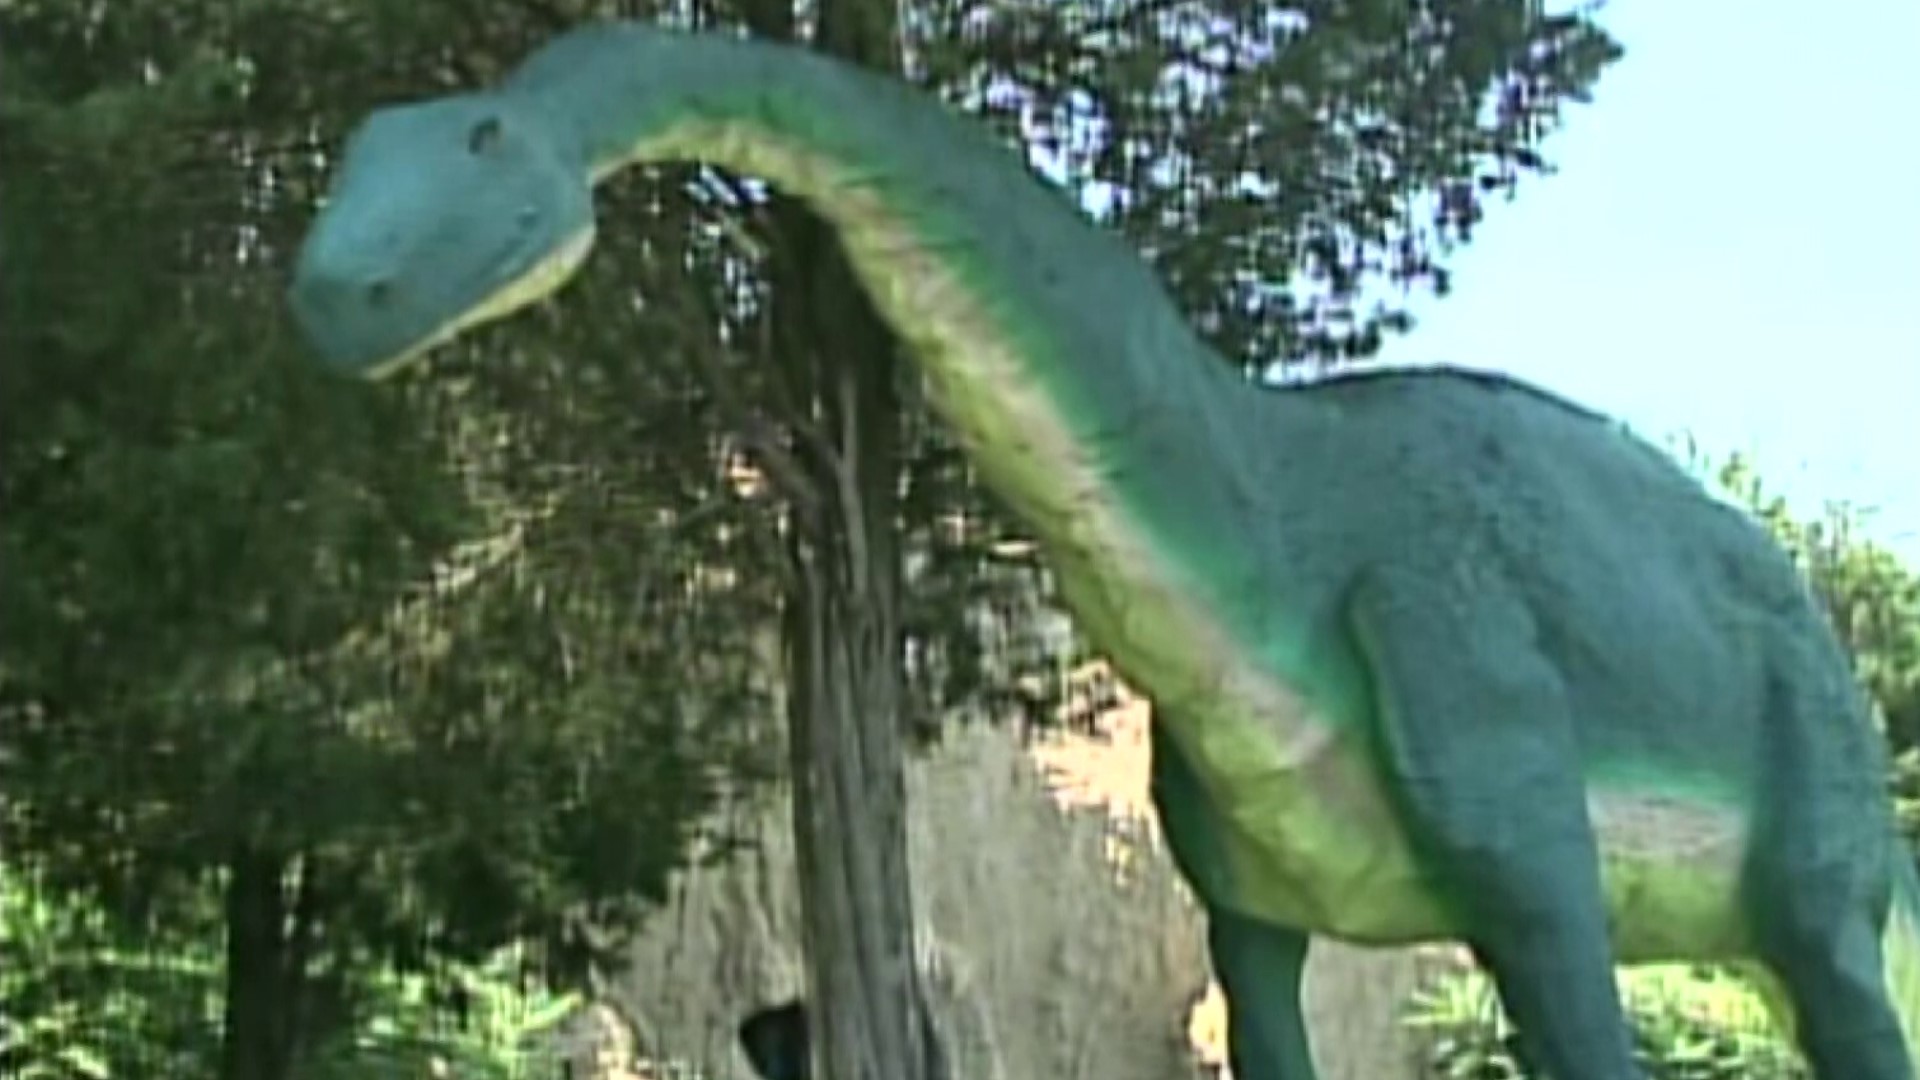 In this penultimate installment of Daytrippin' for 2004, Dick Berry takes us to the Prehistoric Forest and Mystery Hill in Marblehead, Ohio.